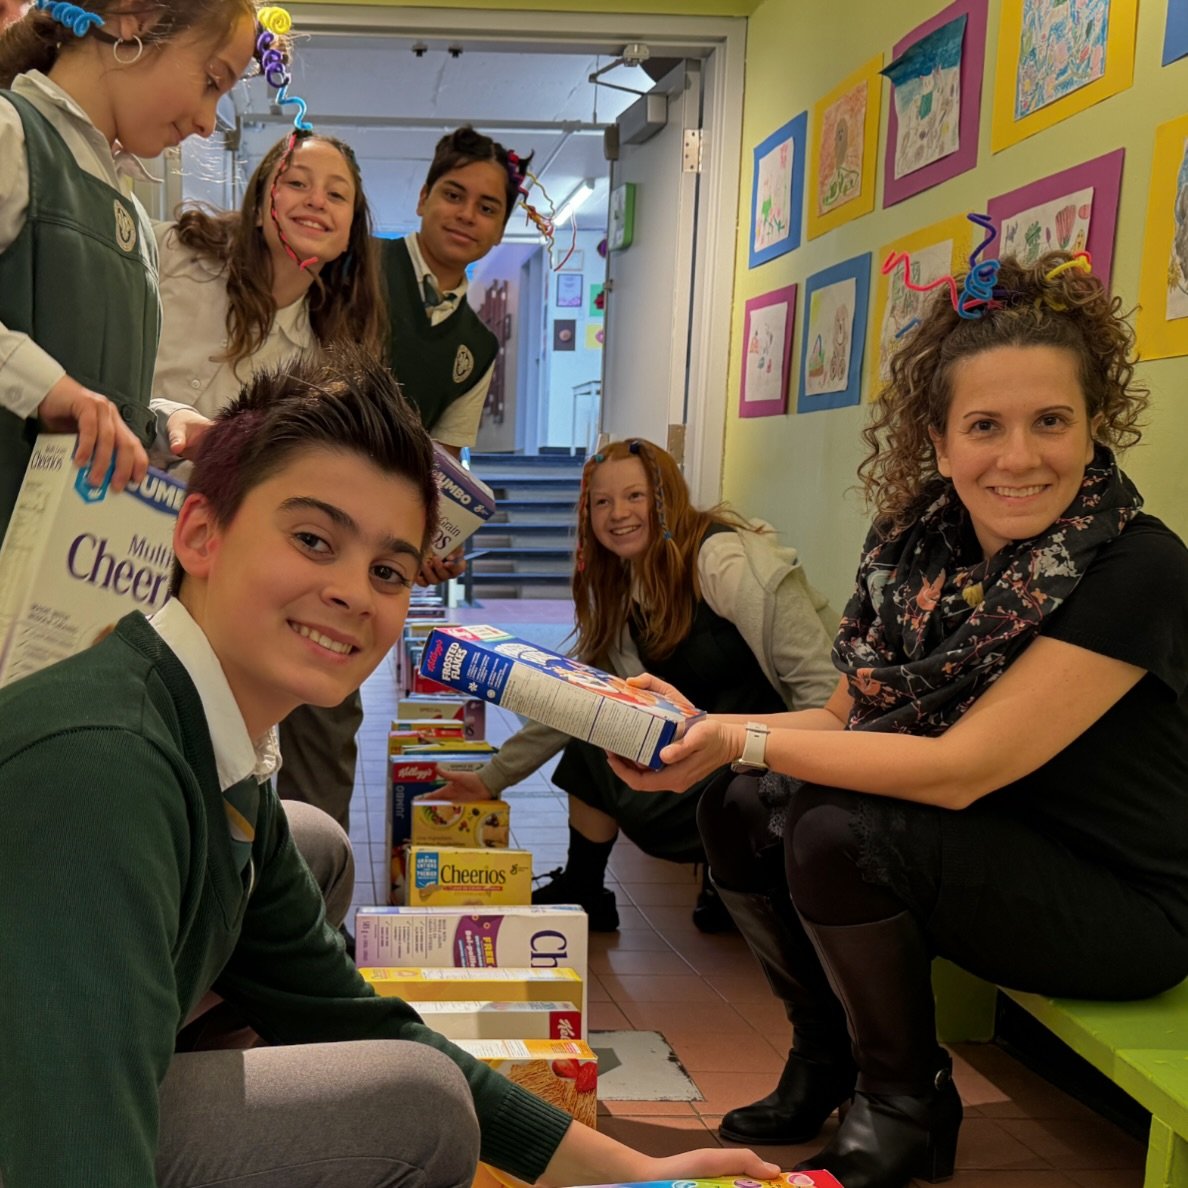 Yesterday, marked a special day at The Priory with the successful hosting of our cereal drive and crazy hair domino day. The student council took great care in placing 198 cereal boxes along the corridors and down the stairs, creating an exciting dom